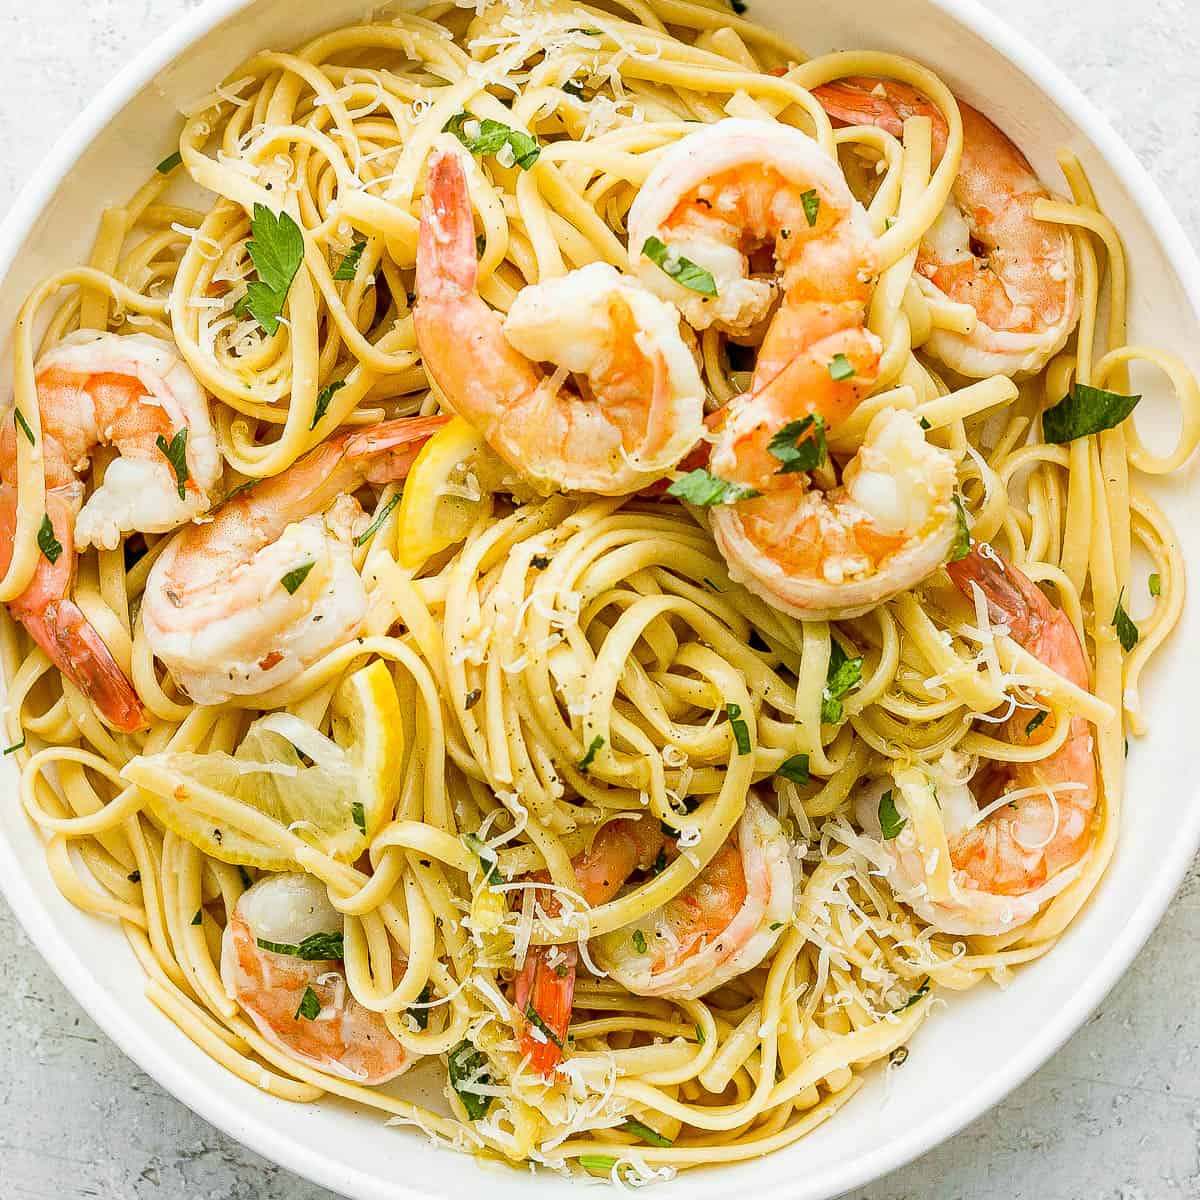 Bowl of shrimp scampi pasta garnished with fresh parsley and parmesan cheese.